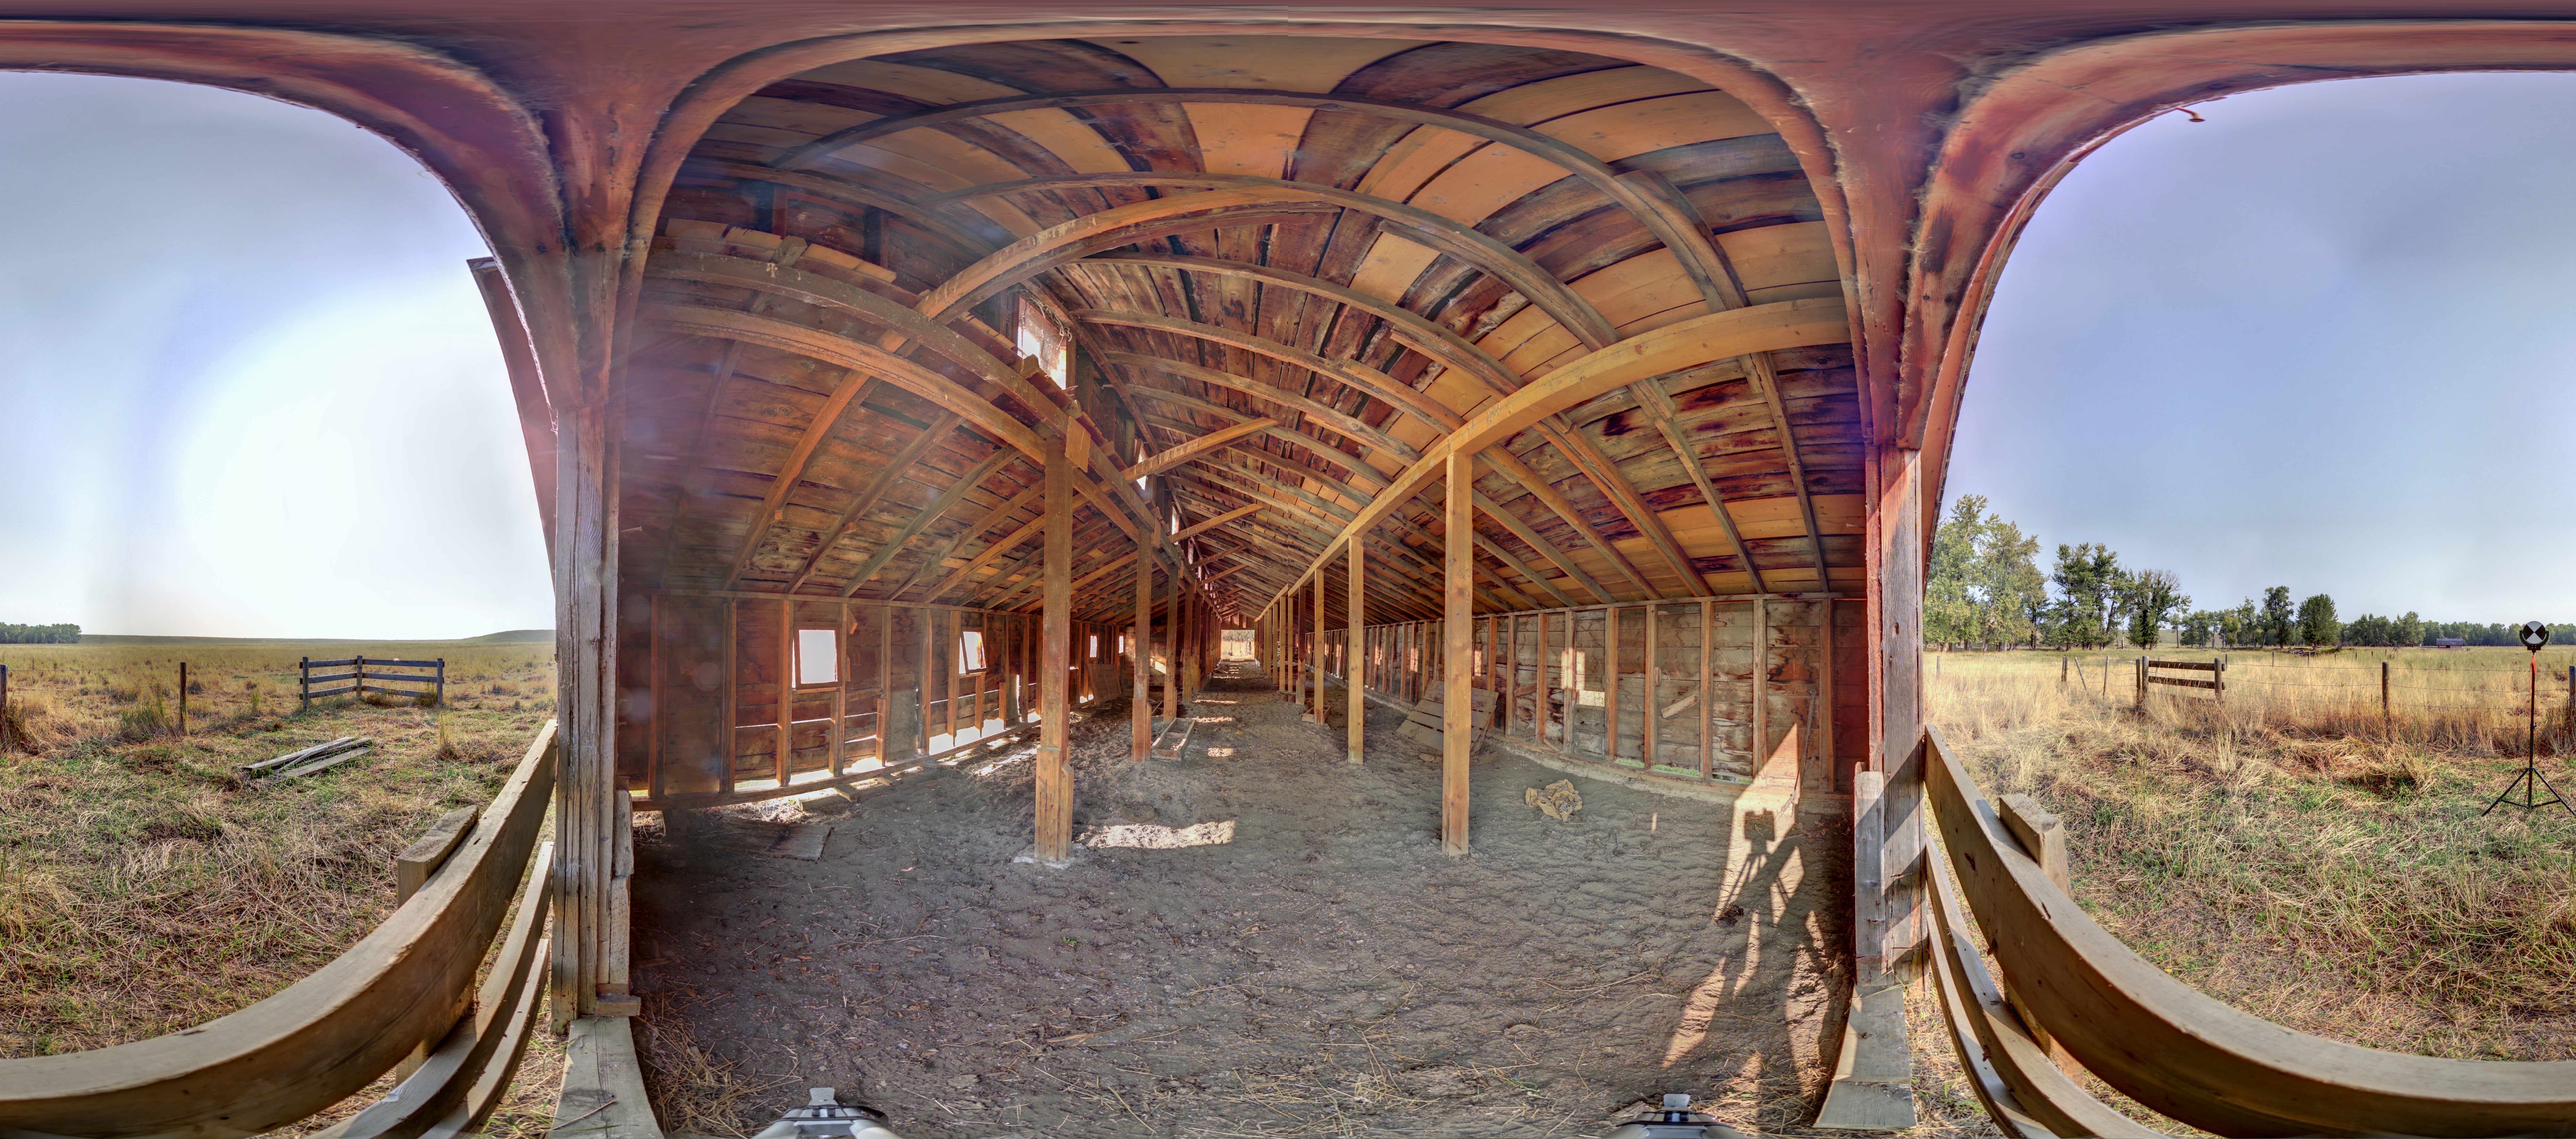 Panoramic image from scan location 1 of the interior of the Piggery at Bar U Ranch